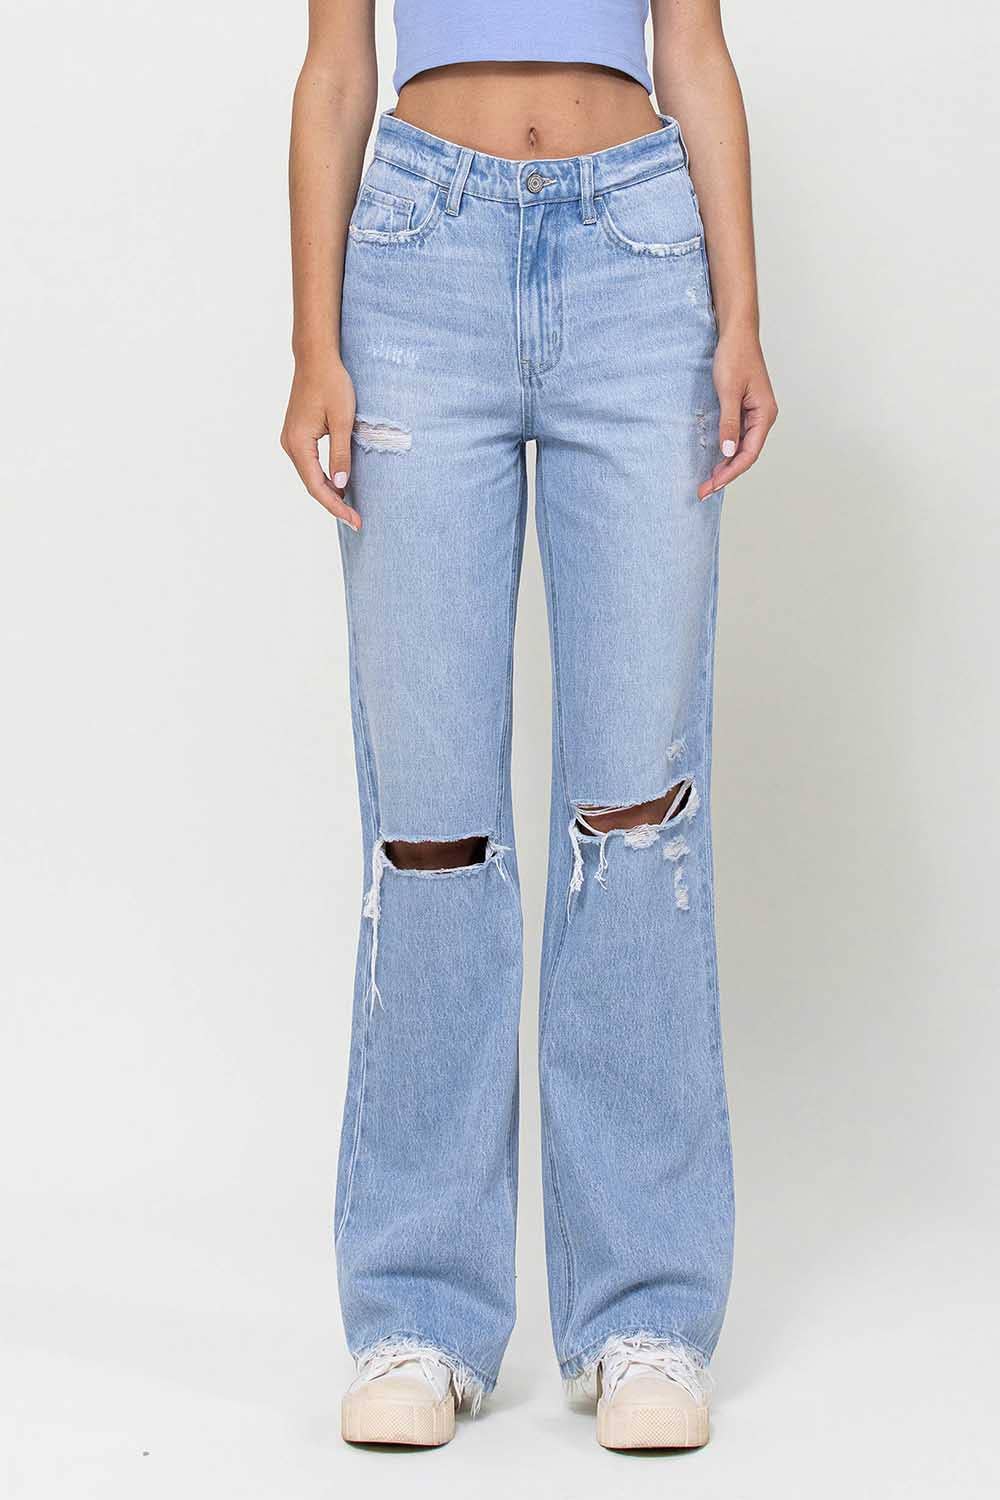 Western promise jeans